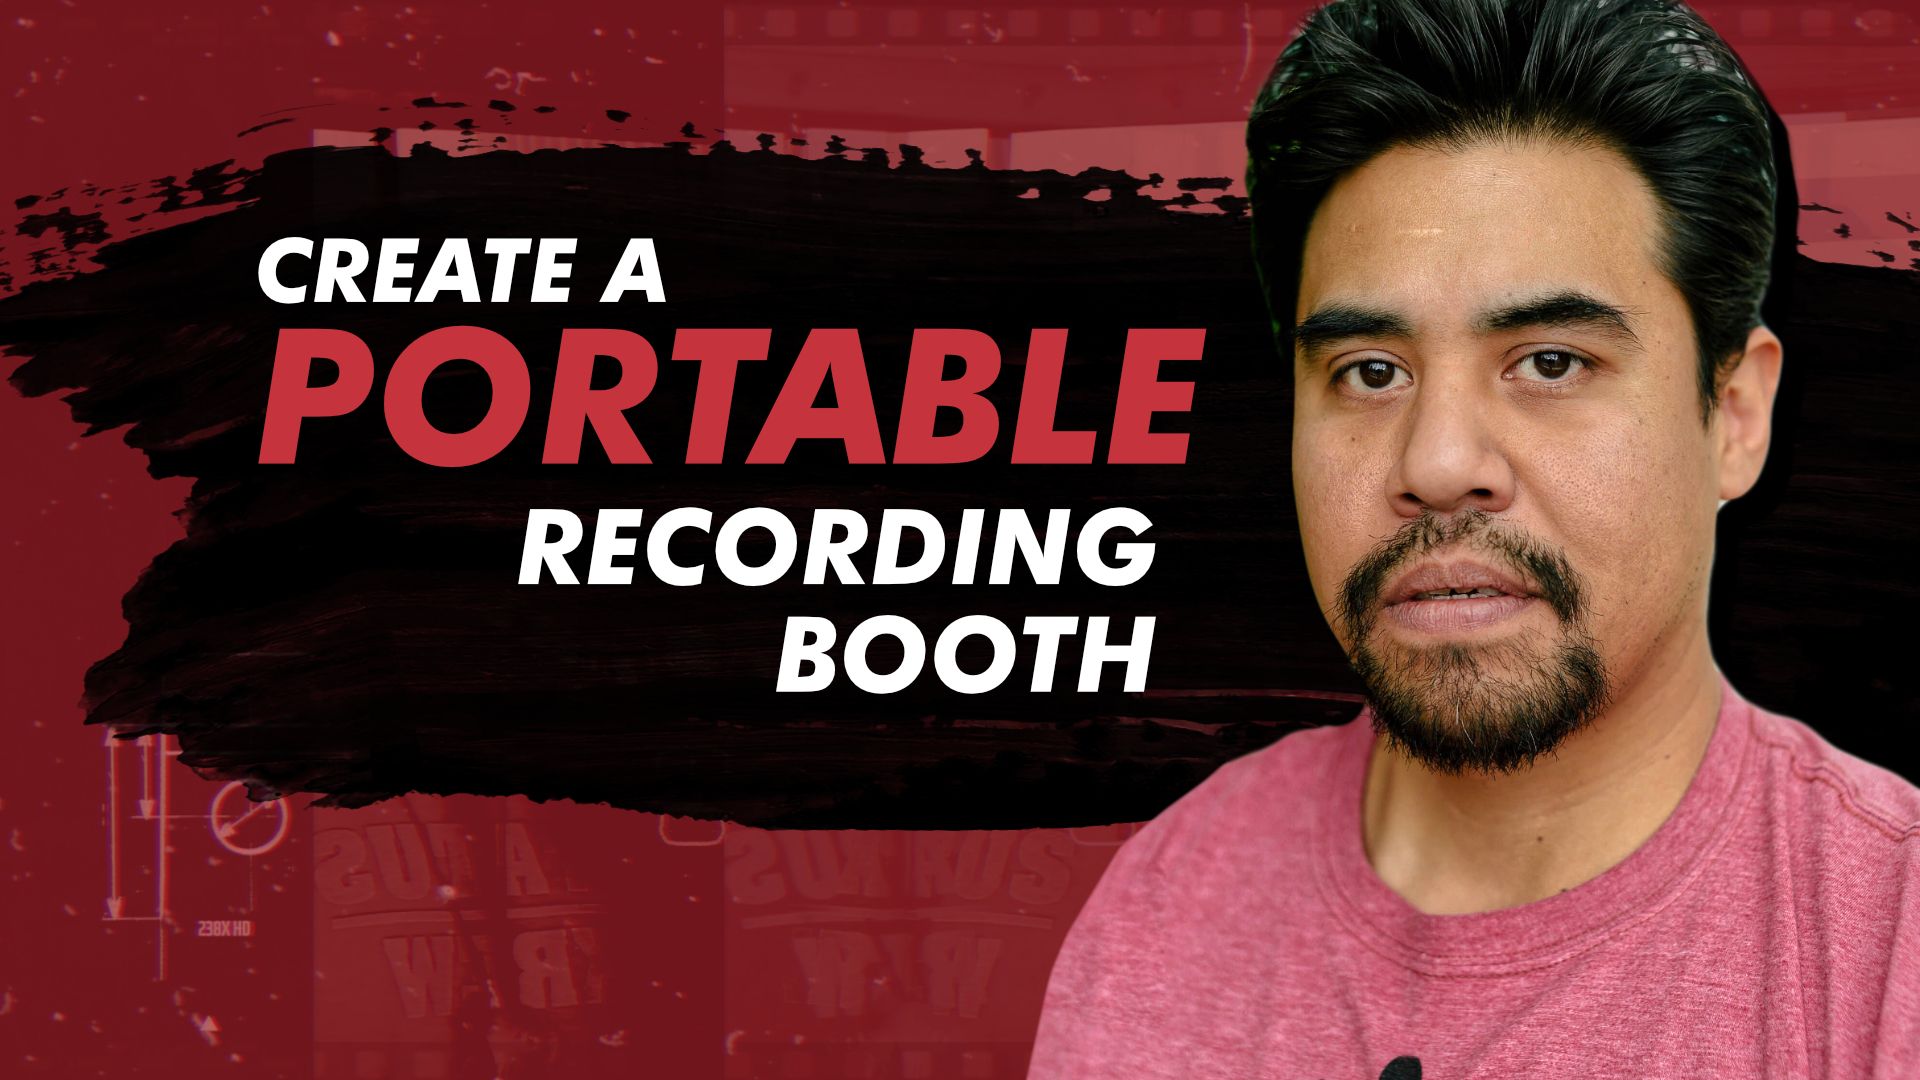 How To Create a Portable Recording Booth